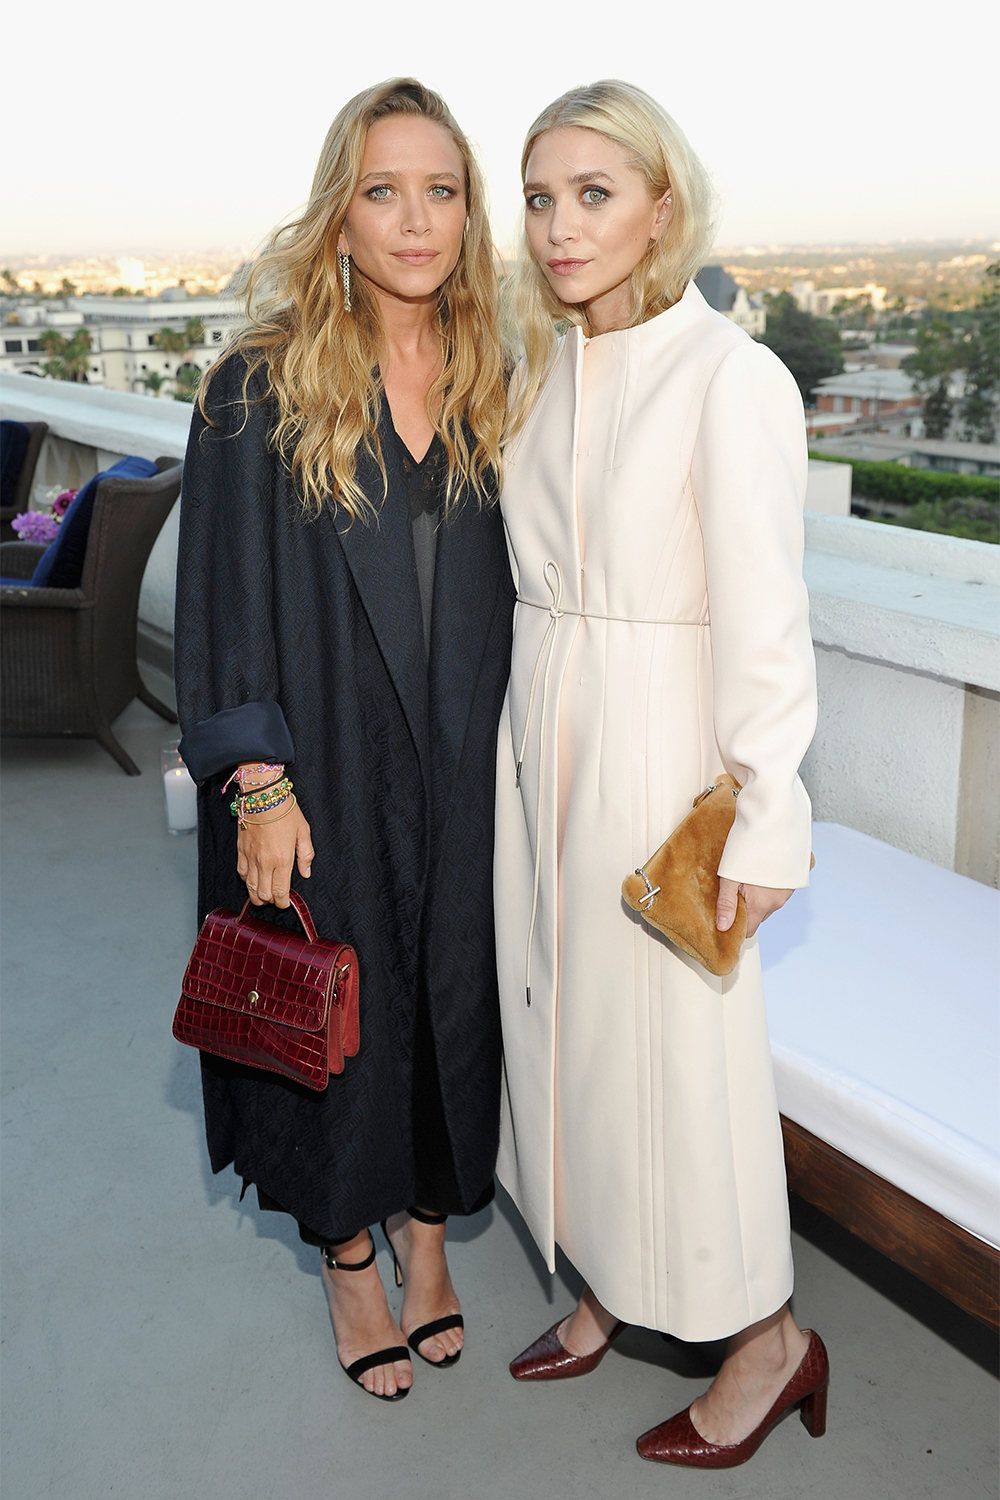 Designer-duo Mary-Kate and Ashley Olsen look impeccable in their signature minimalist style at the launch of their Elizabeth and James flagship store opening party at the Chateau Marmont in LA.